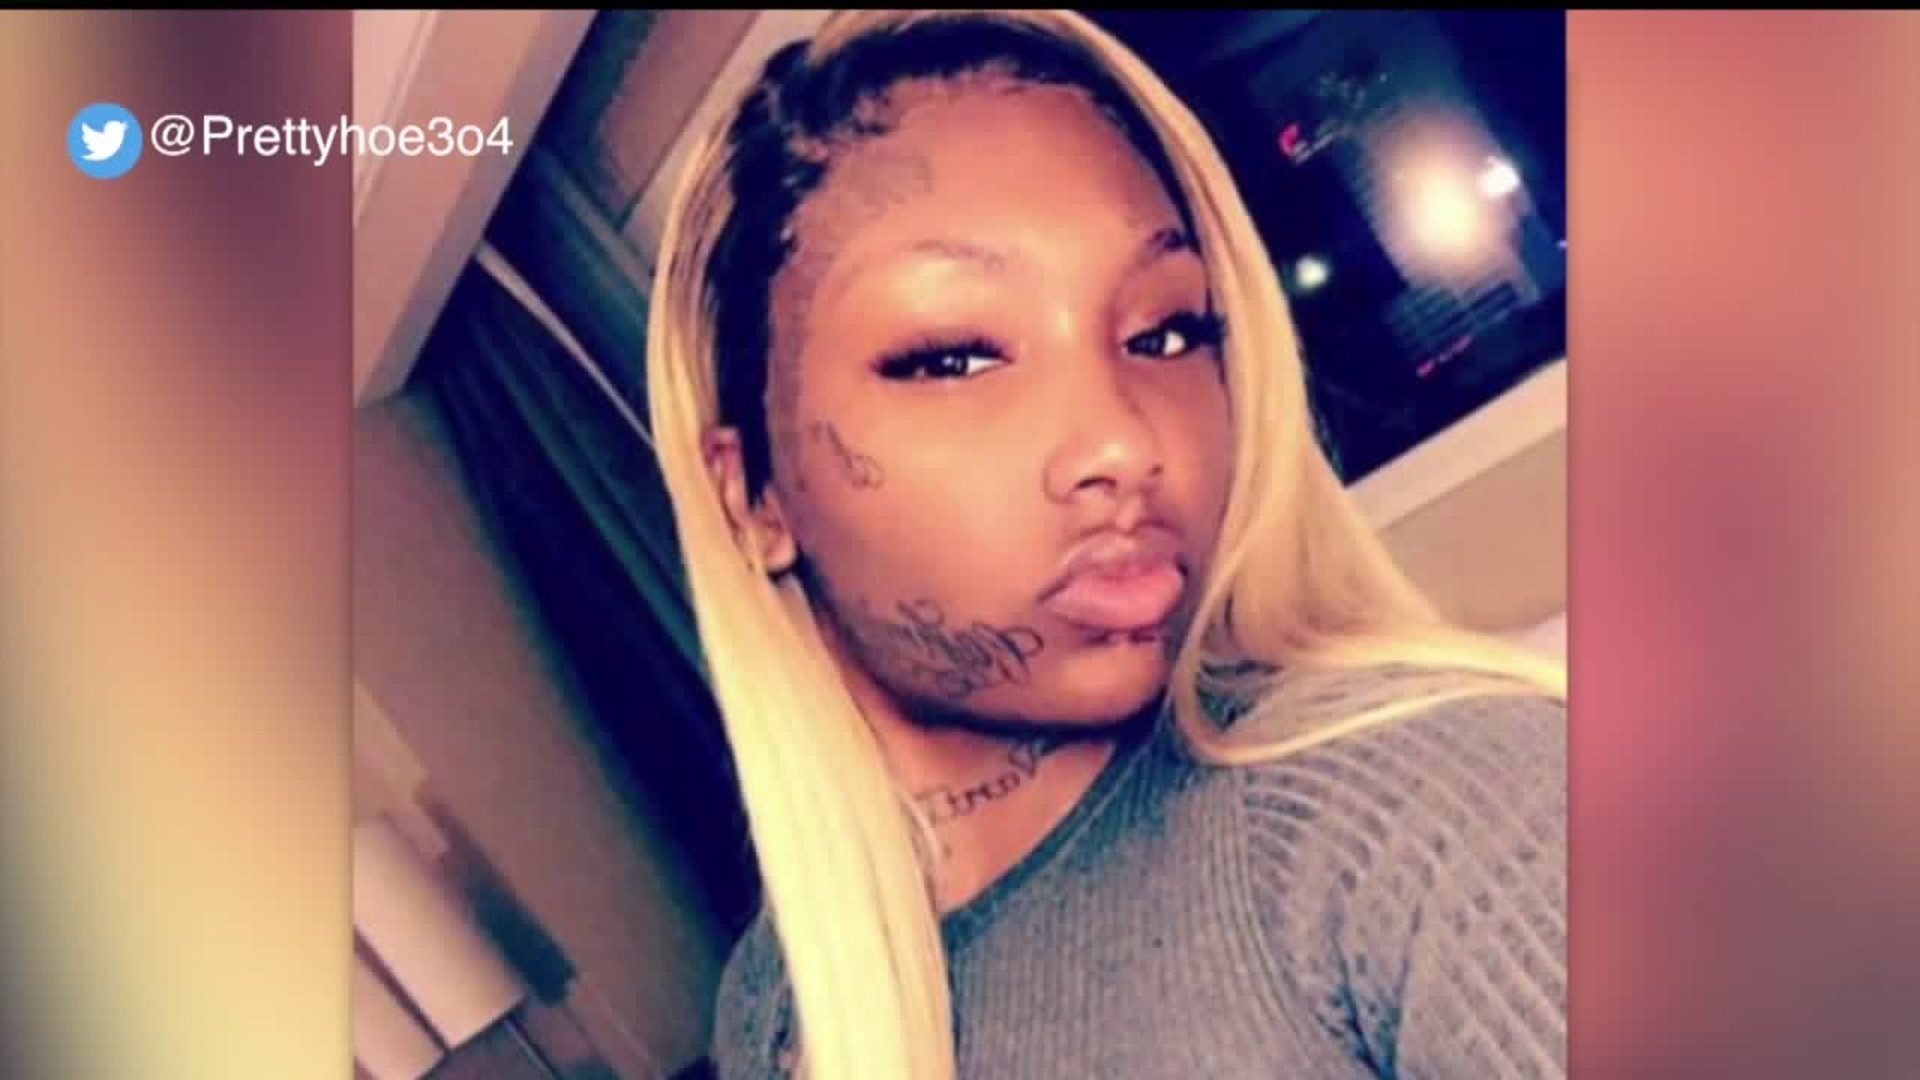 Self-proclaimed `pretty hoe` is going to jail